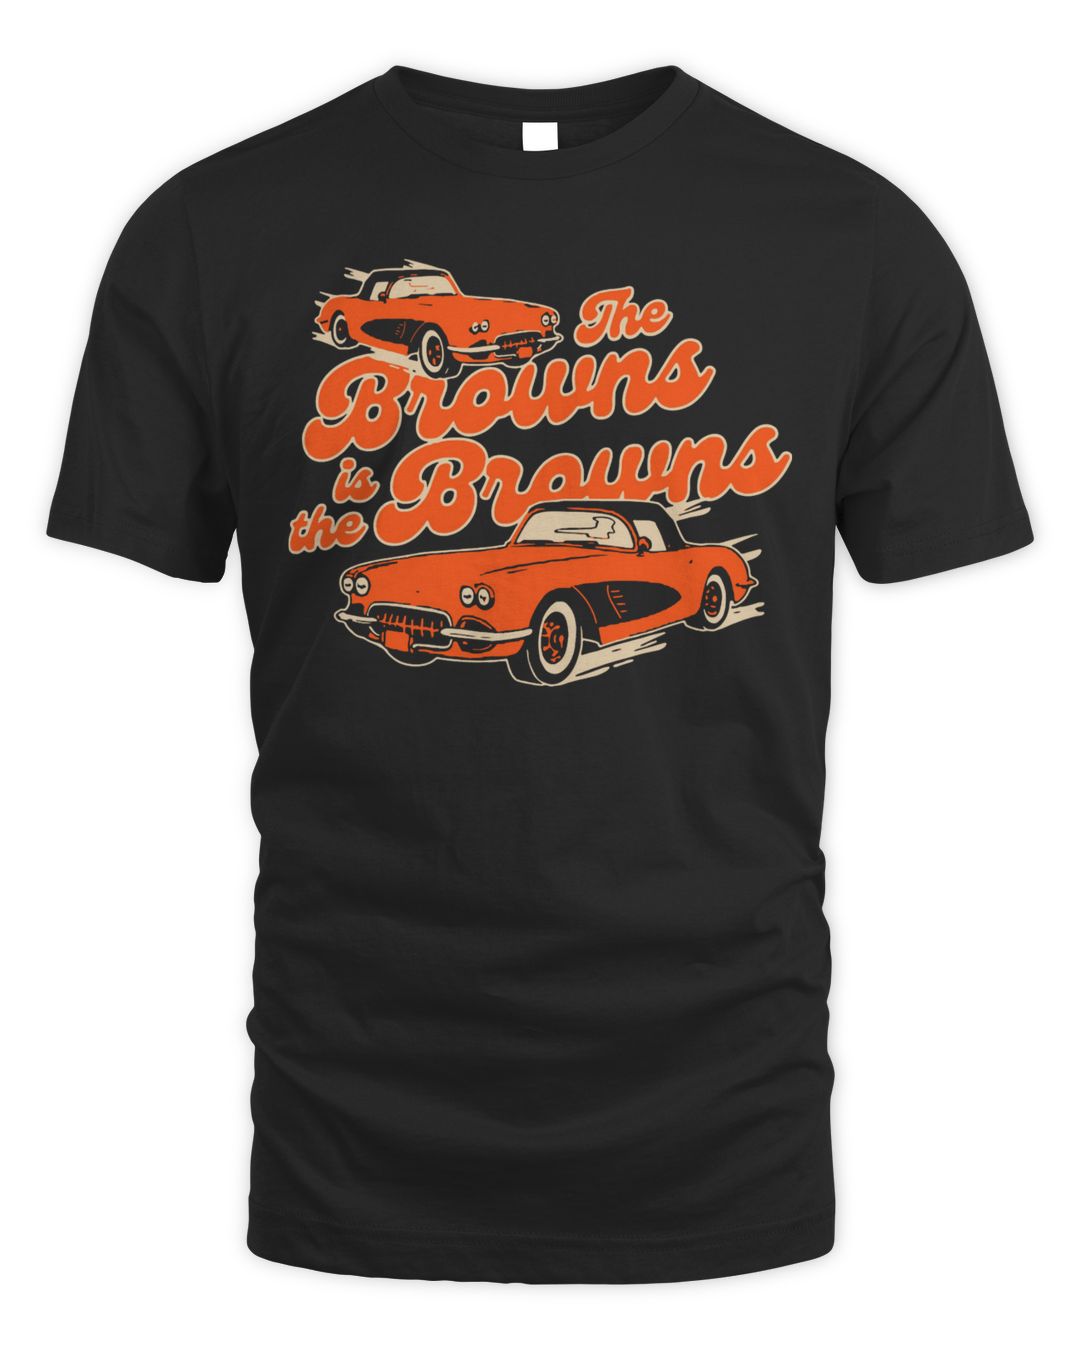 Pat Mcafee Merch The Browns Is The Browns Shirt